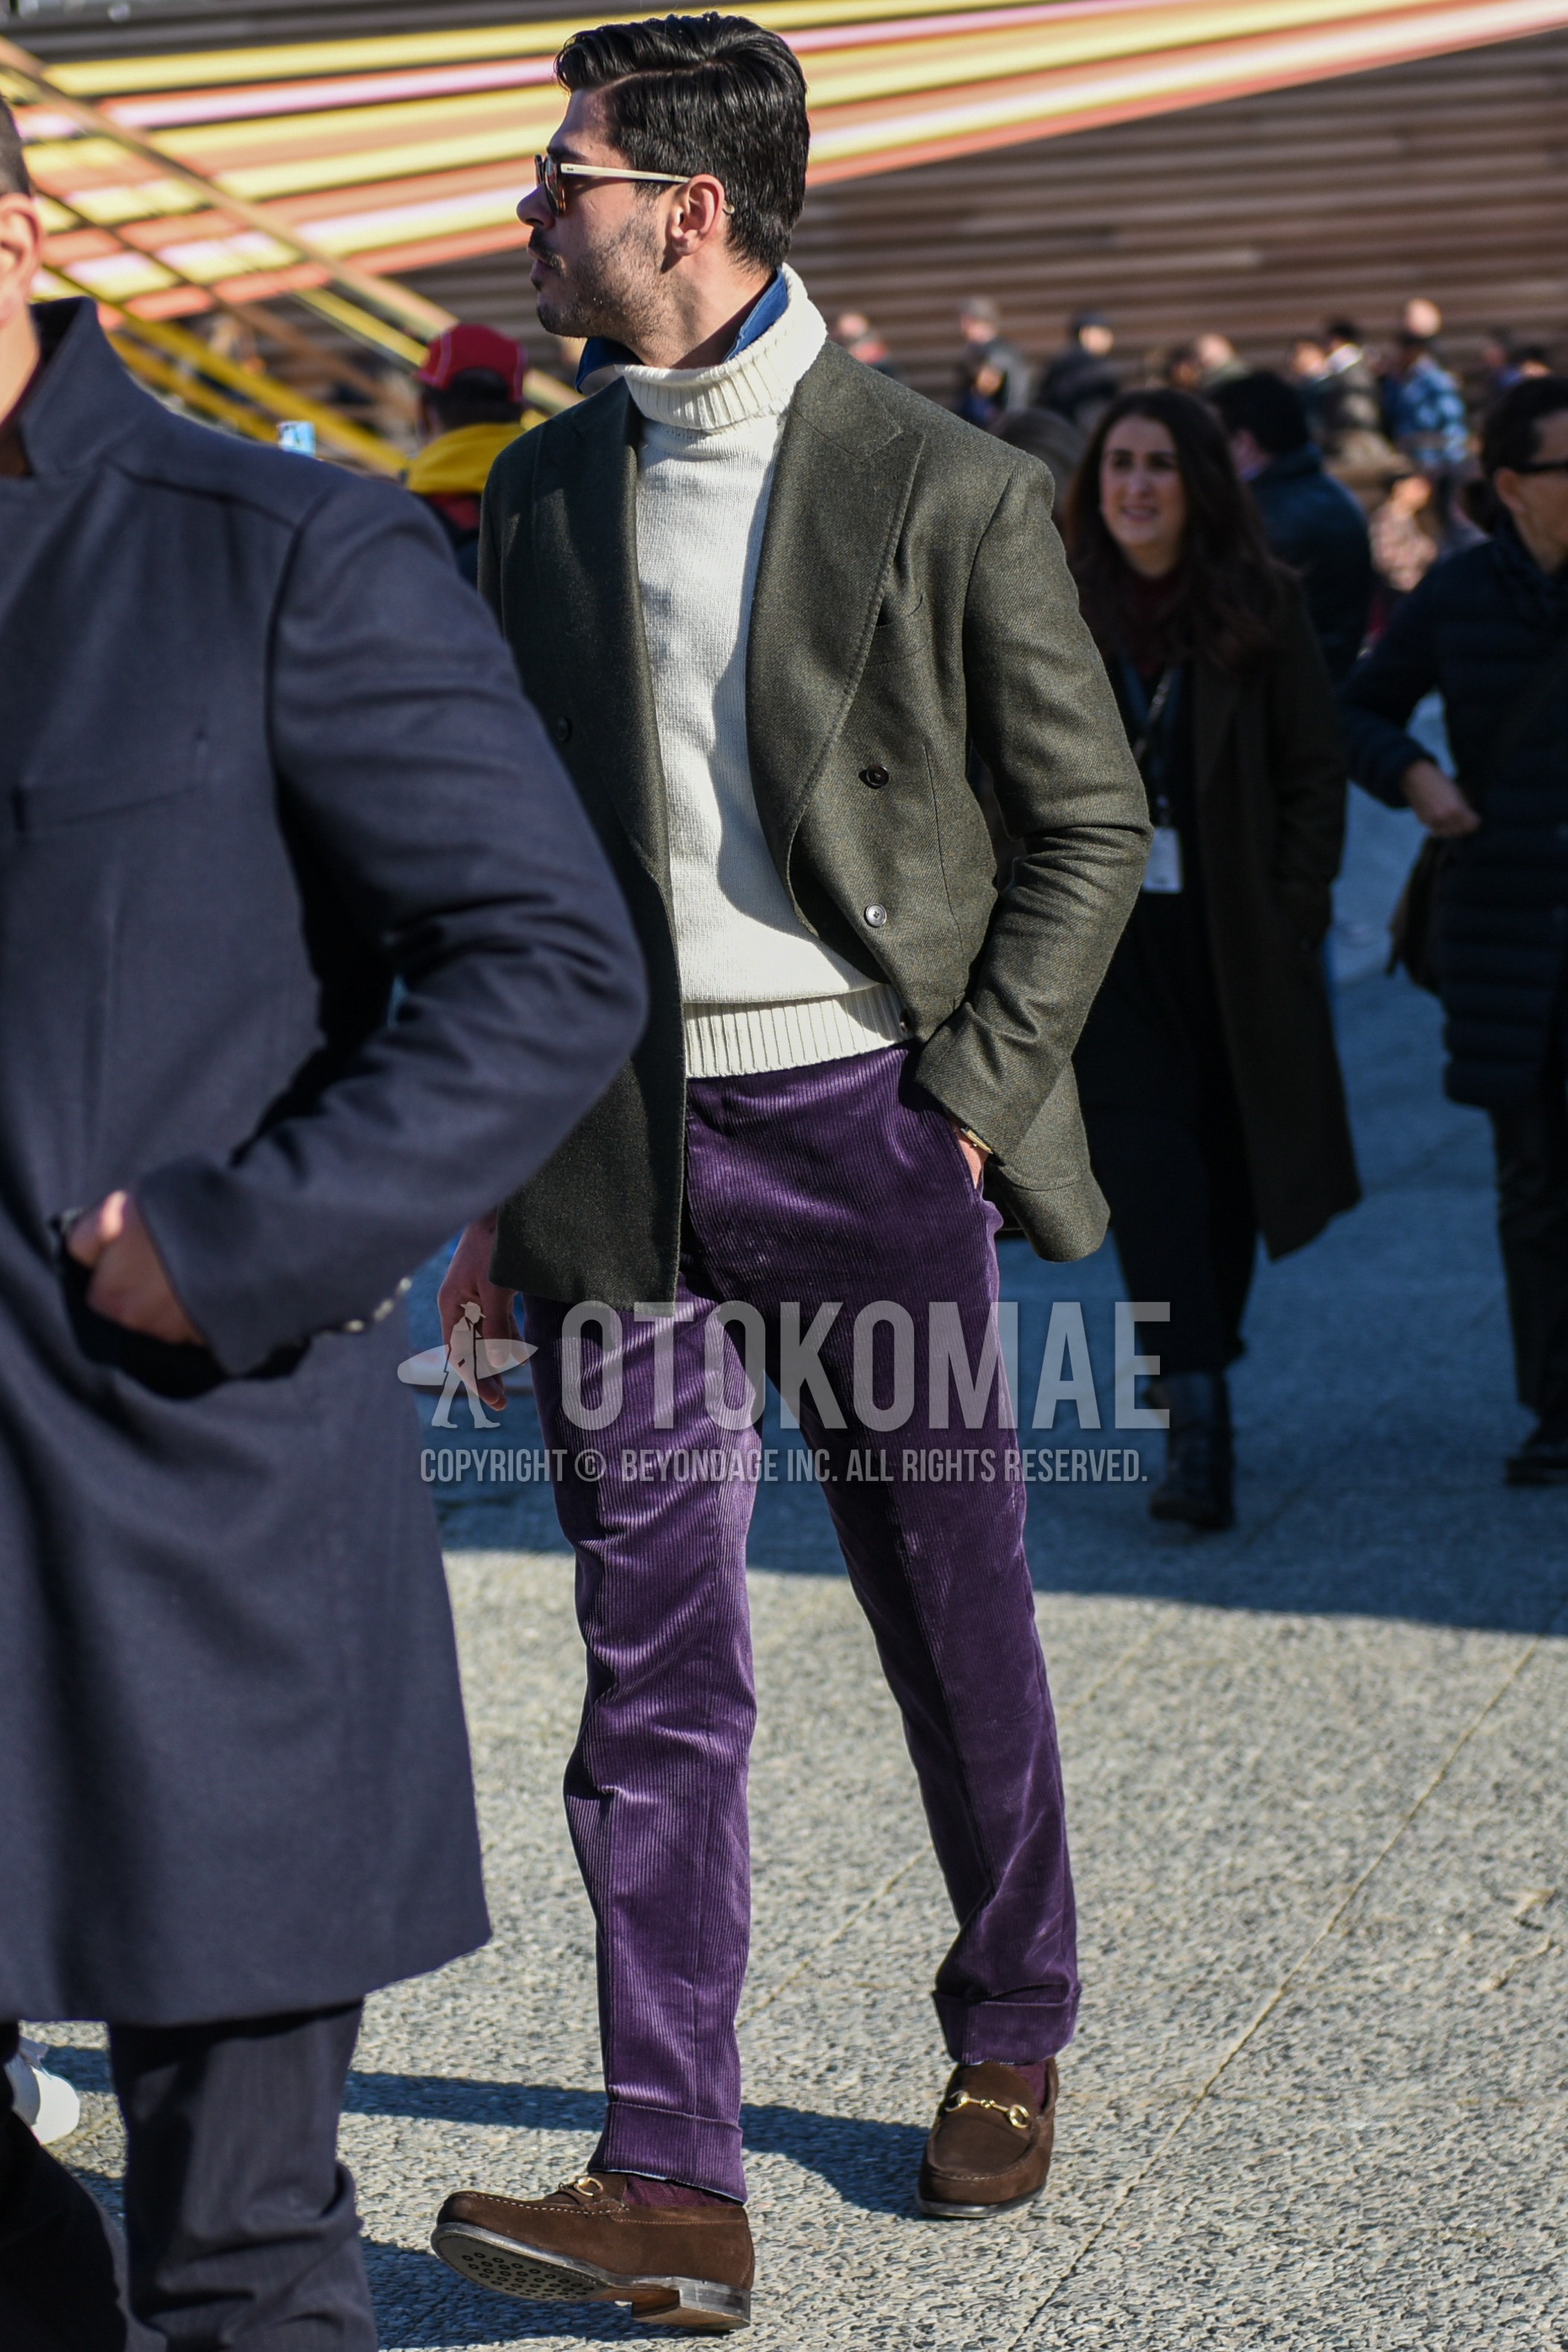 Men's autumn winter outfit with gray plain tailored jacket, white plain turtleneck knit, purple plain winter pants (corduroy,velour), purple plain socks, brown bit loafers leather shoes.